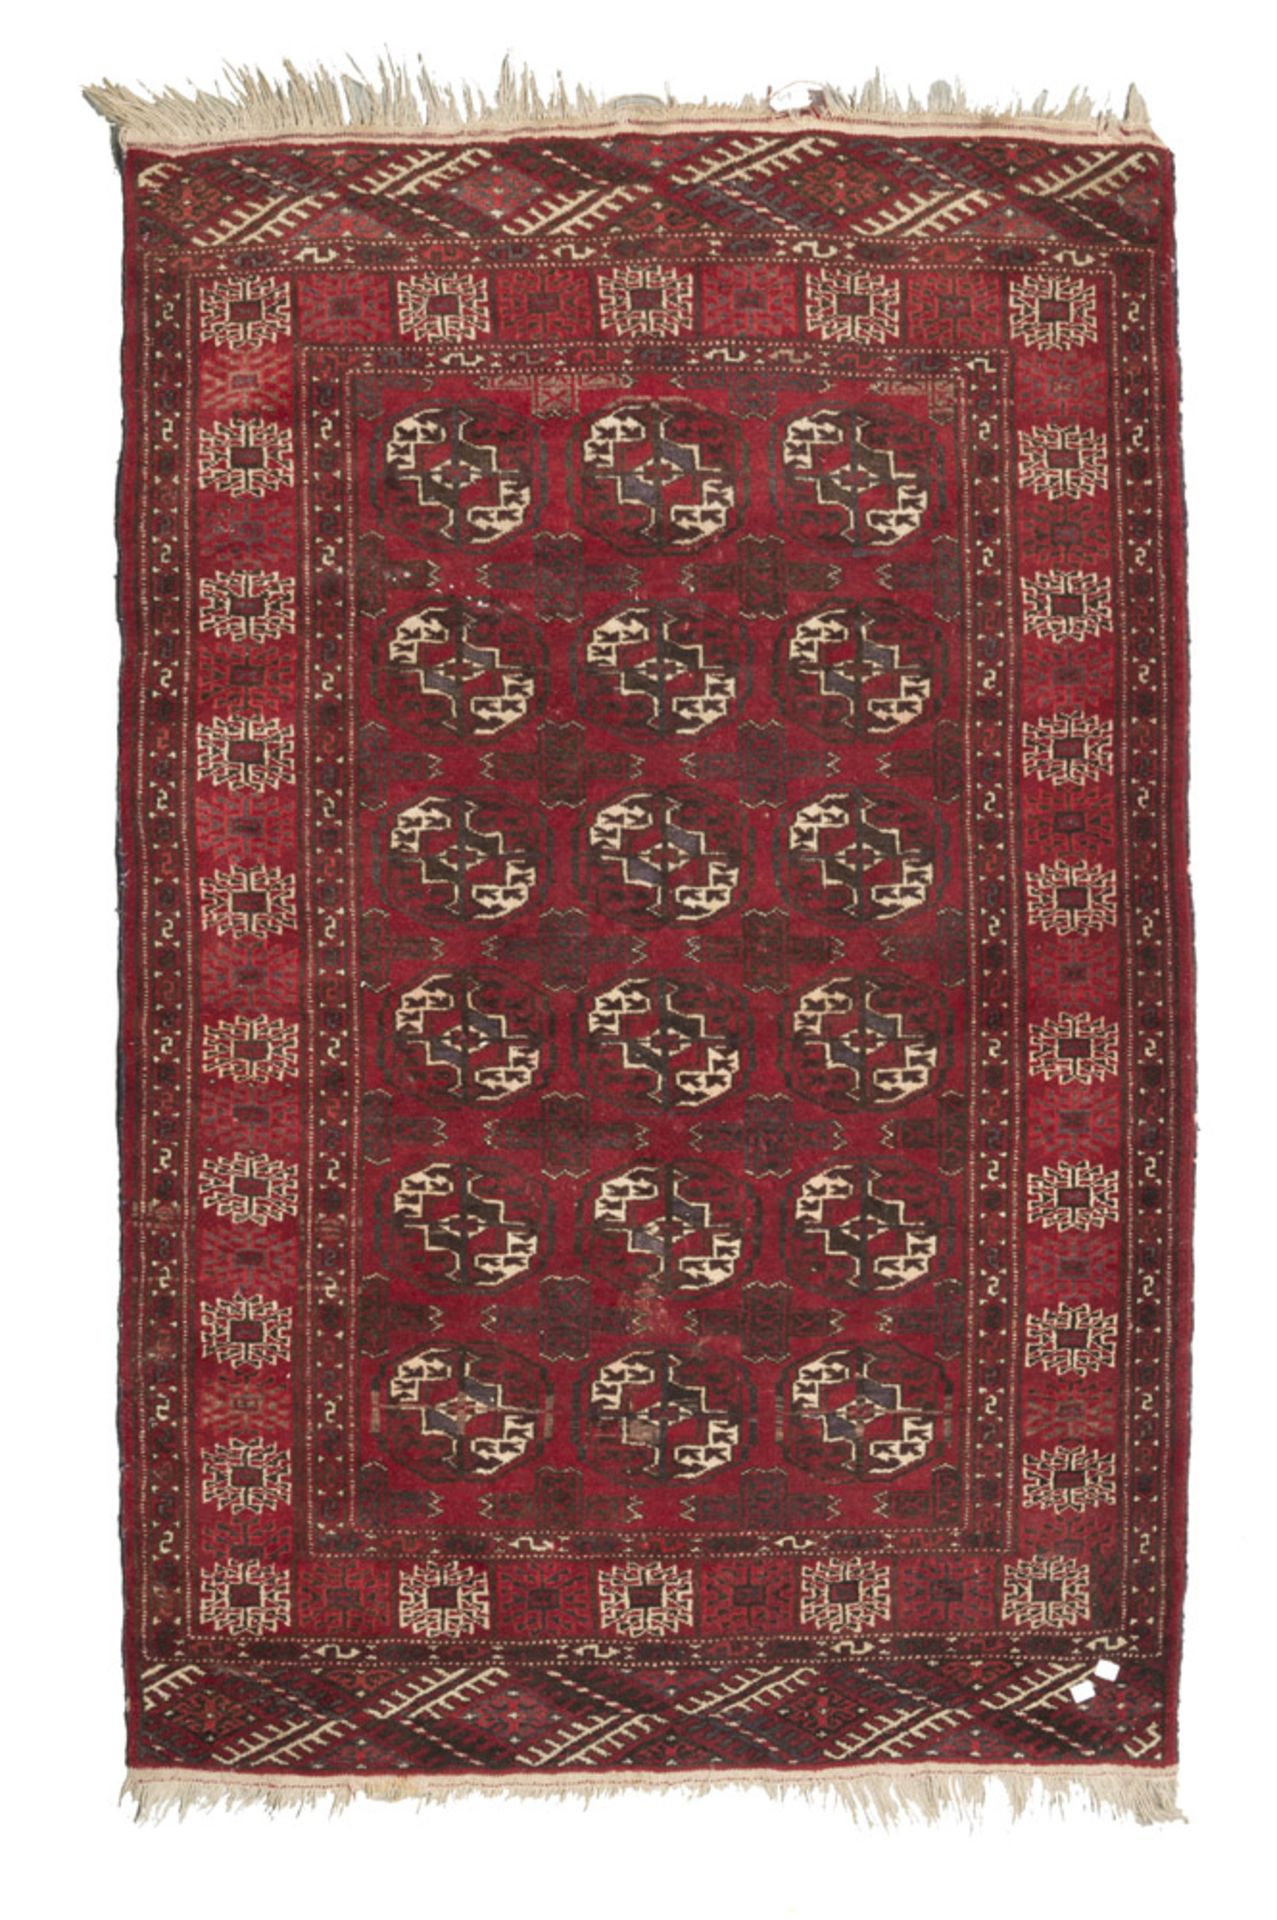 PAKISTAN CARPET, EARLY 20TH CENTURY bokara design, in the field with red ground. Measures cm. 170